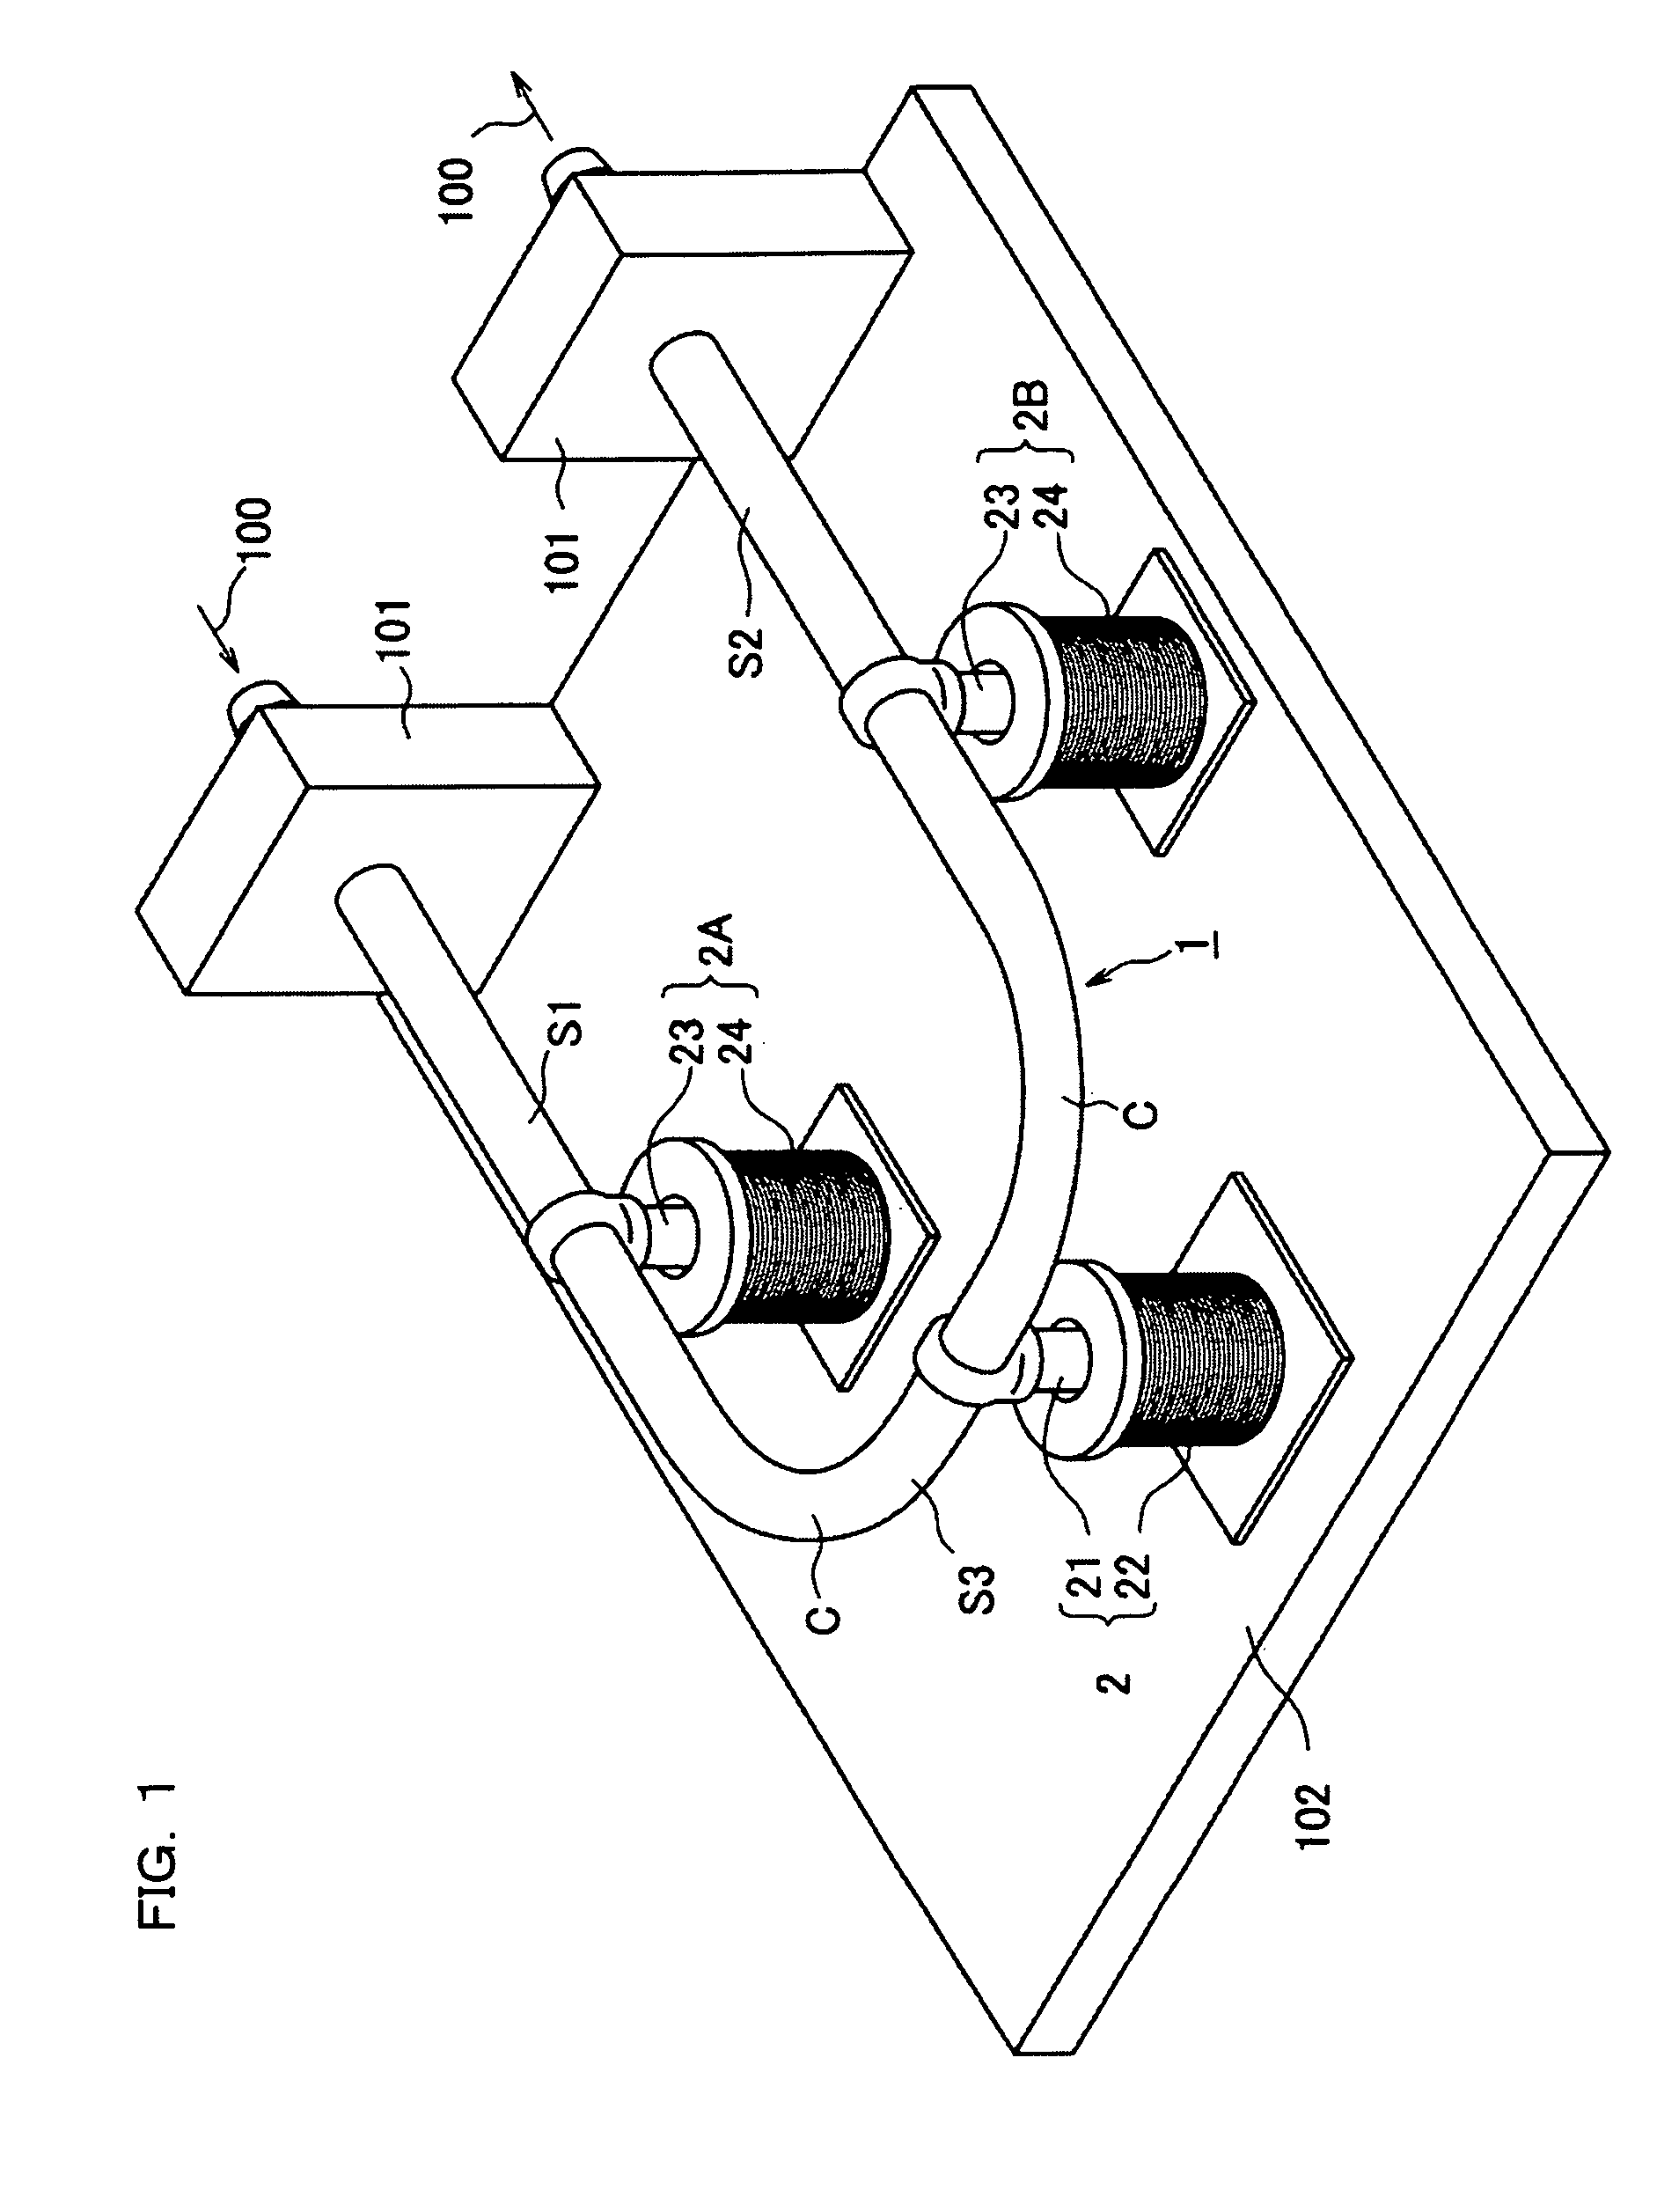 Coriolis mass flowmeter including an inner pipe made of fluororesin and outer pipe having fibers